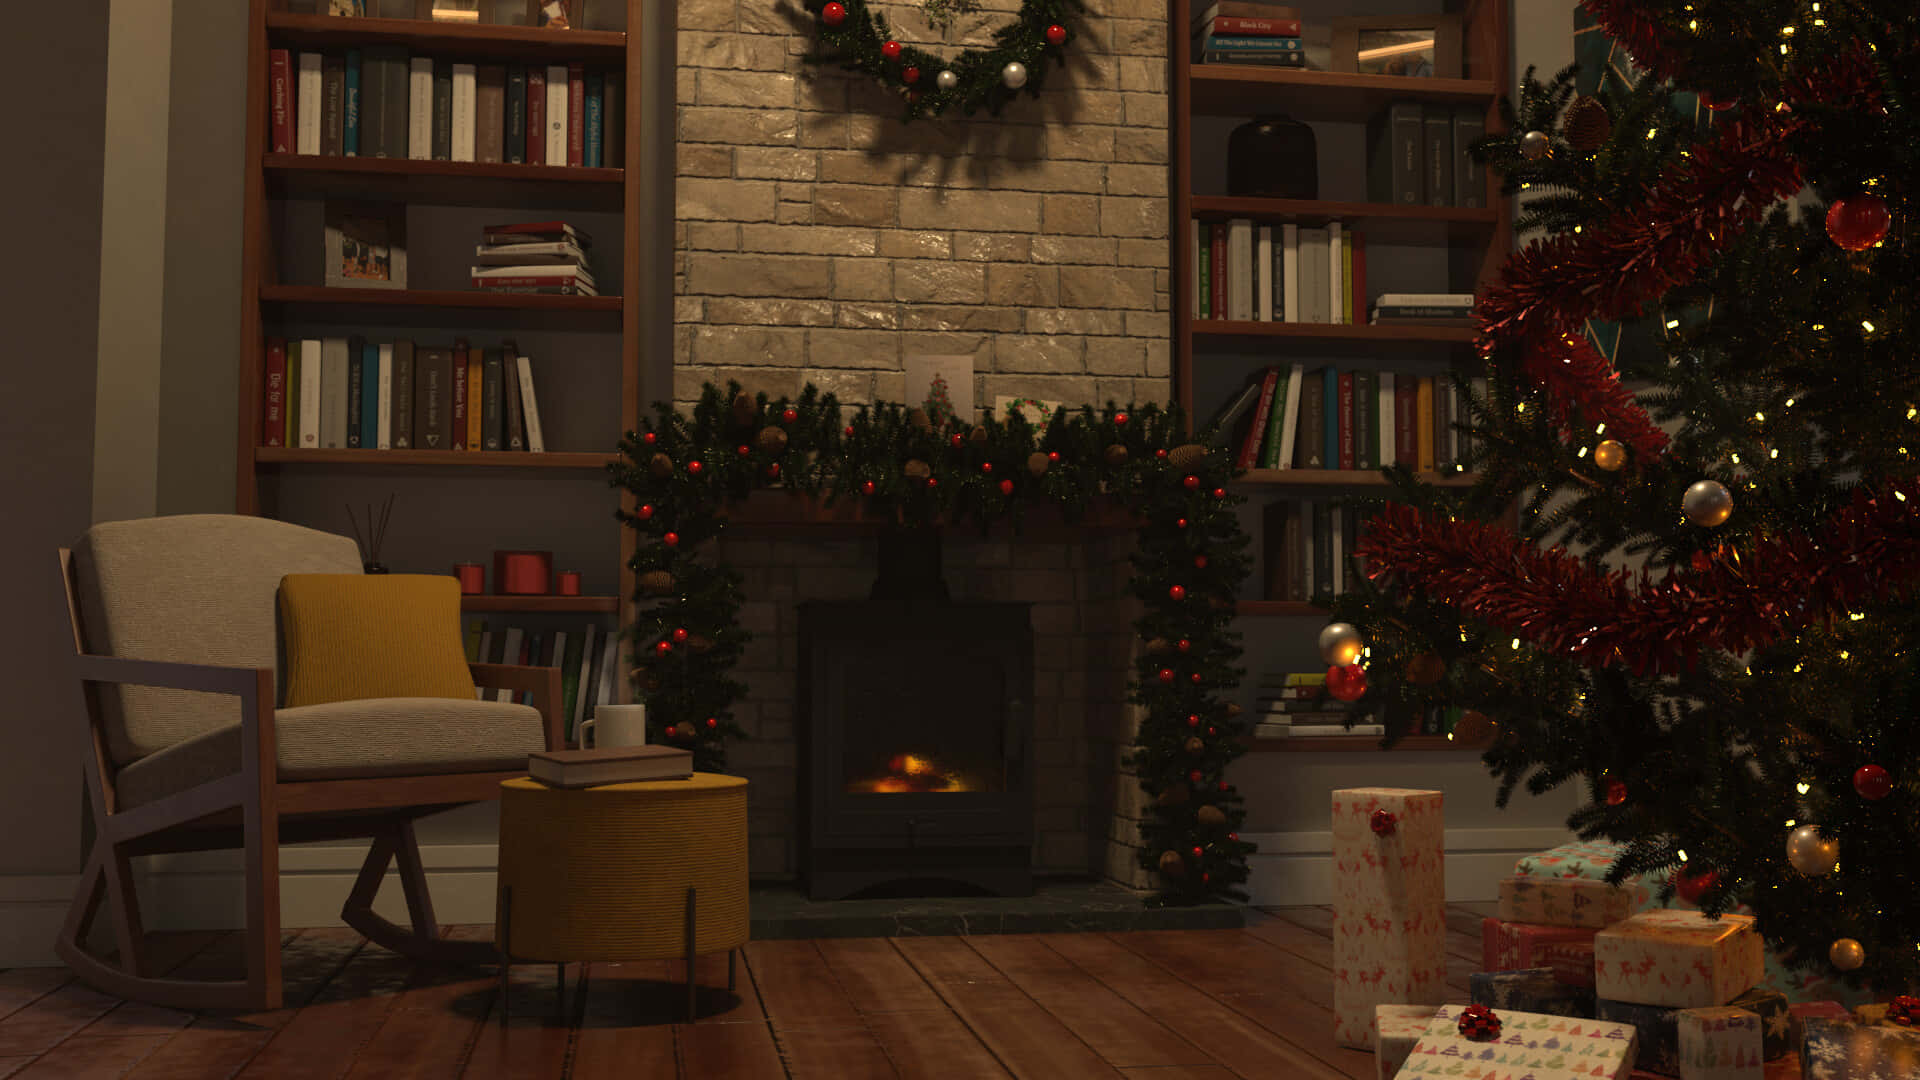 A Christmas Tree In A Room With Bookshelves